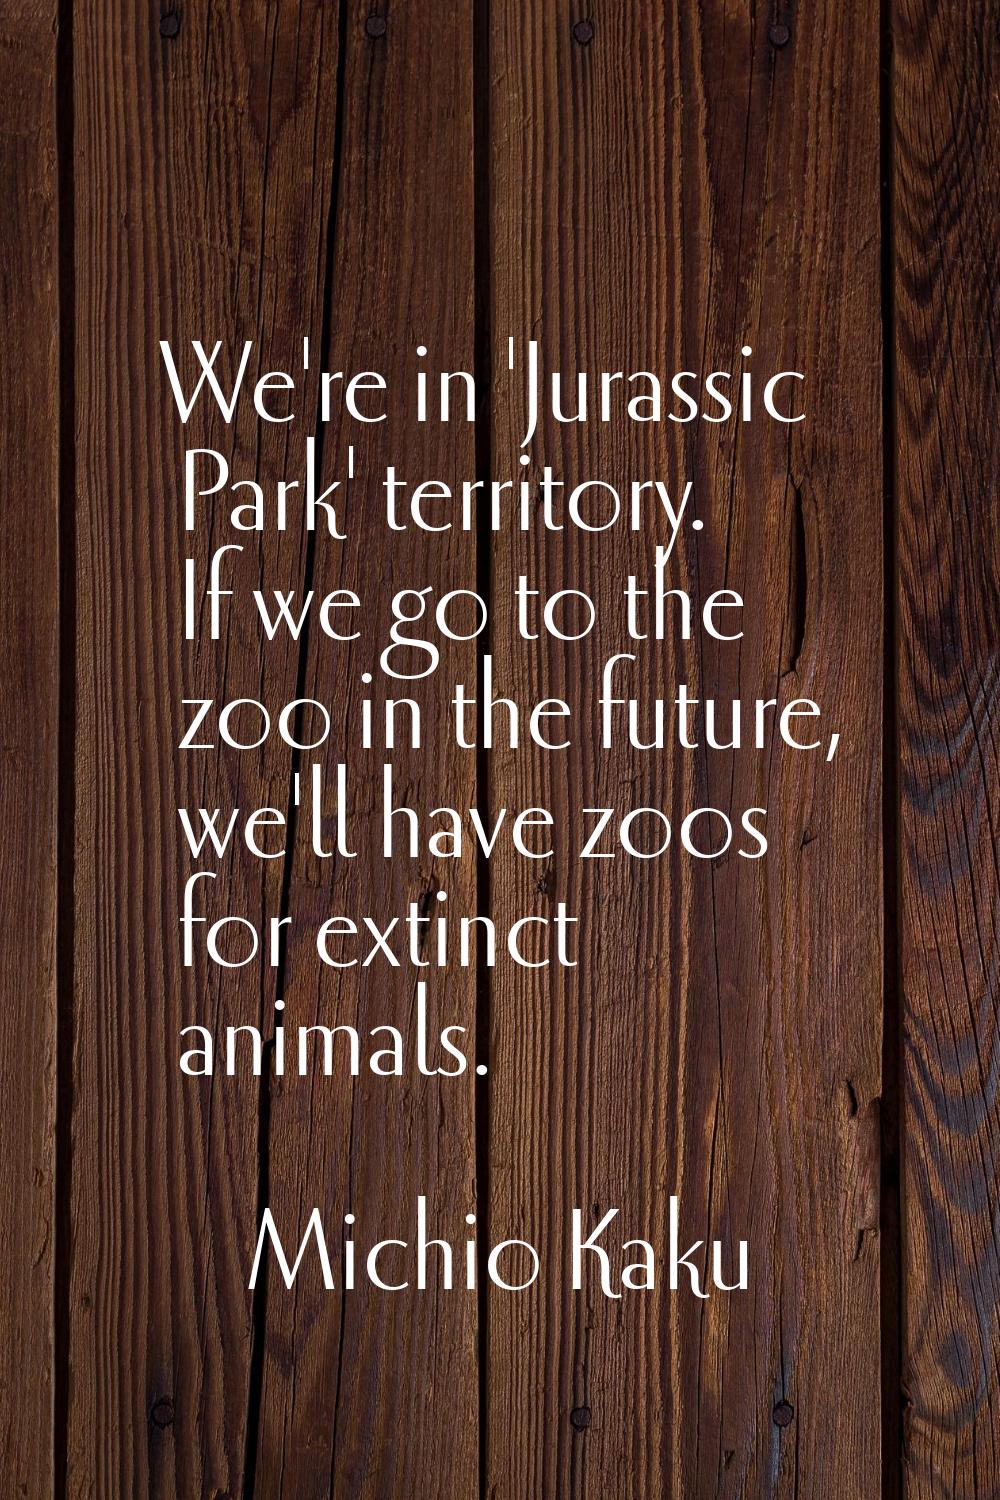 We're in 'Jurassic Park' territory. If we go to the zoo in the future, we'll have zoos for extinct 